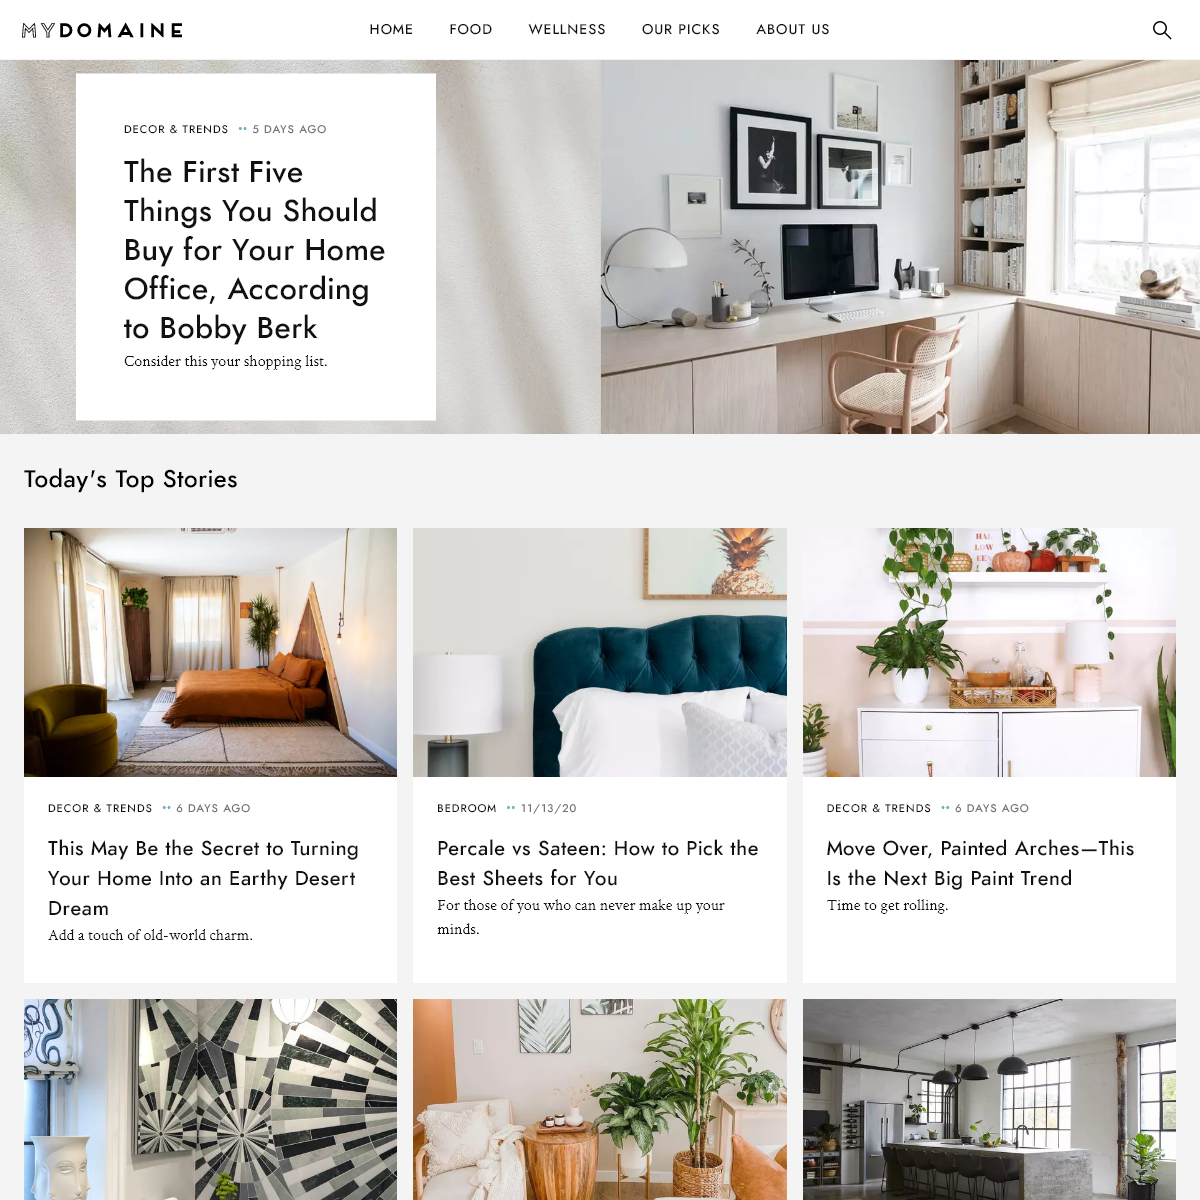 A Stylish Curation of Home Design Inspiration, Lifestyle Advice, and Trends.